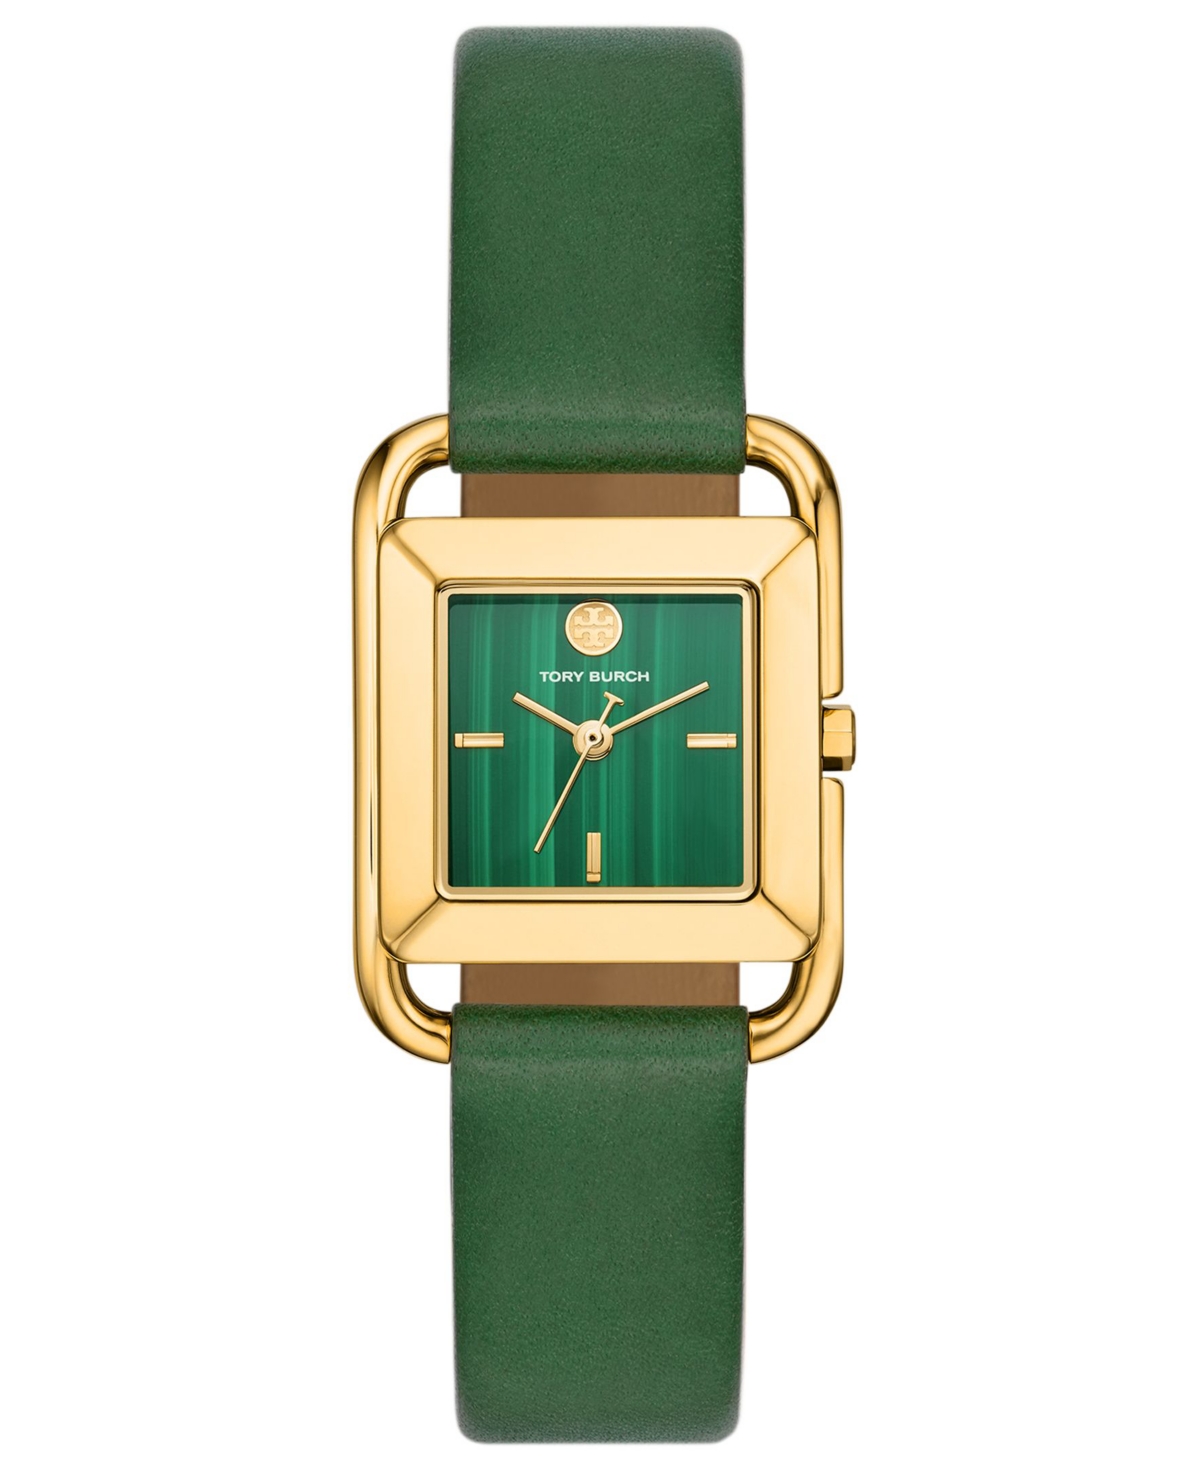 TORY BURCH WOMEN'S THE MILLER SQUARE GREEN LEATHER STRAP WATCH 24MM